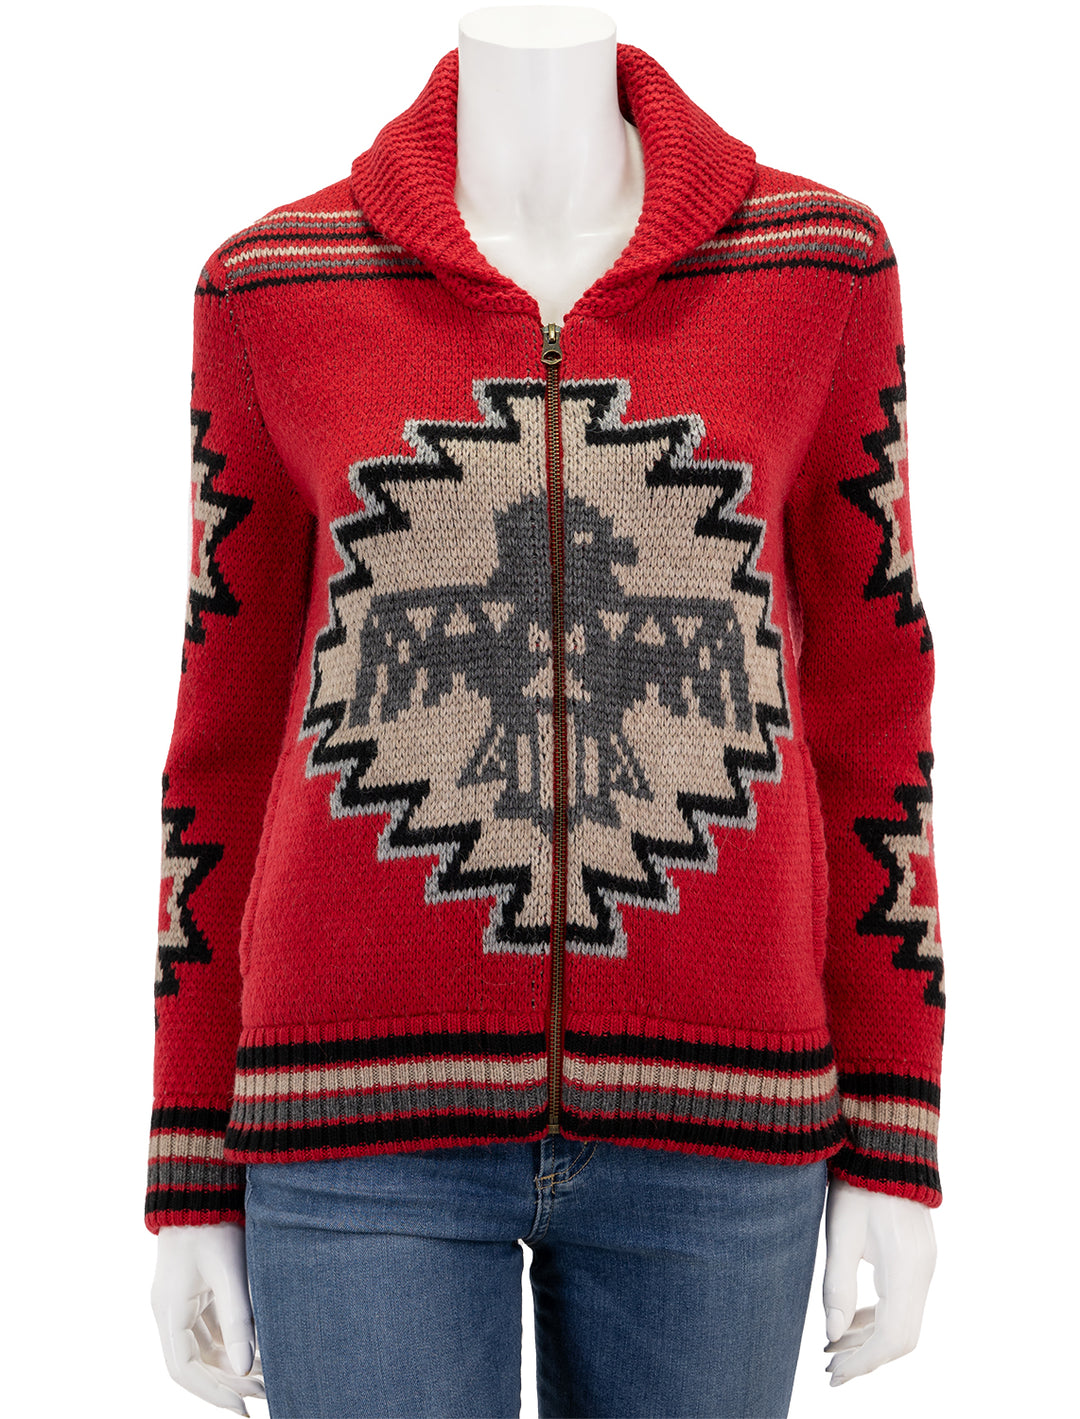 Front view of Faherty's spj thunderbird cardigan.